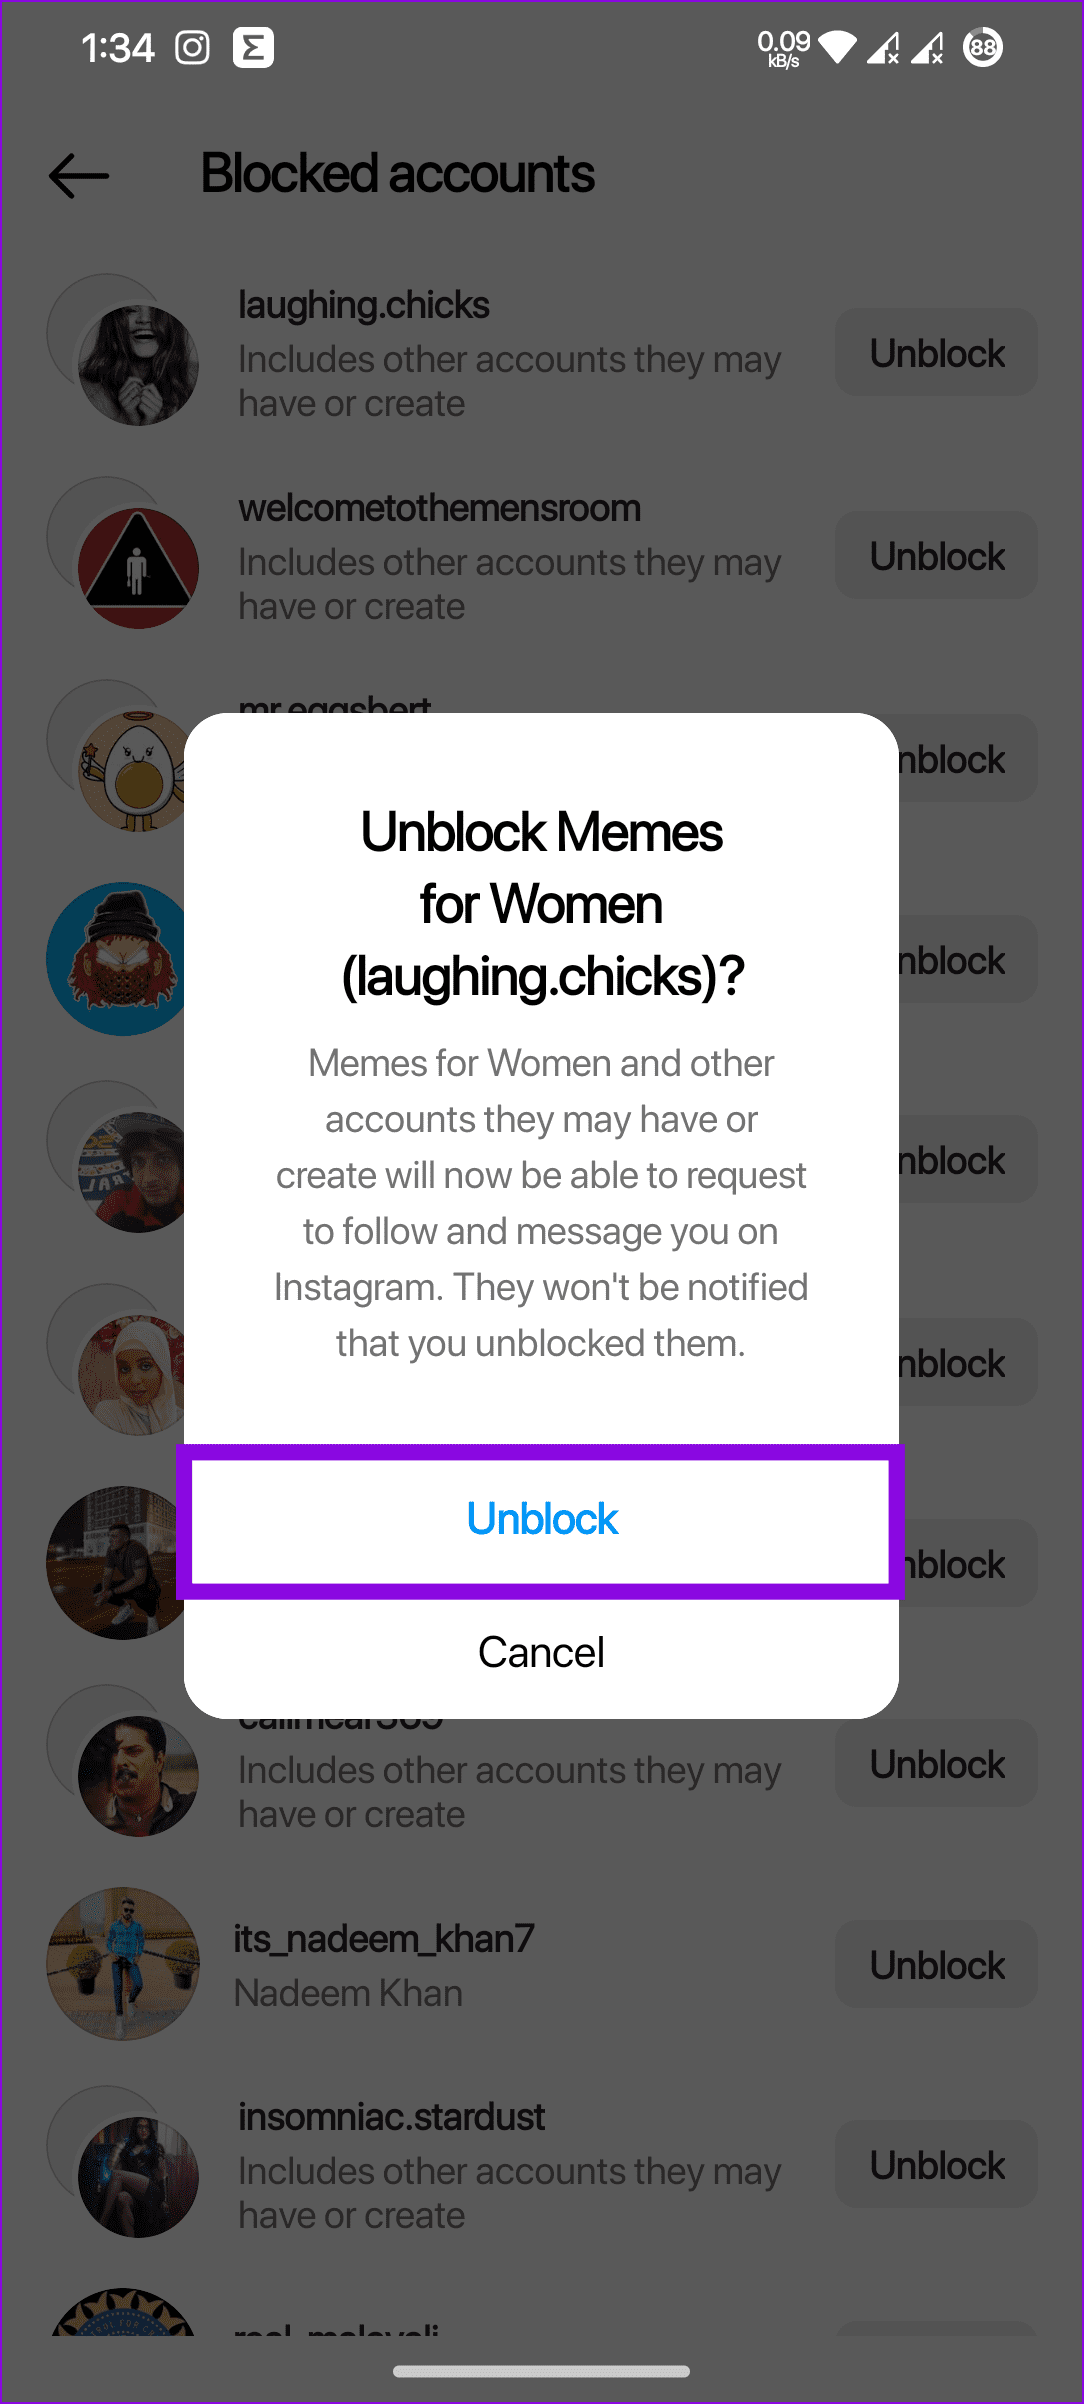 choose Unblock to confirm